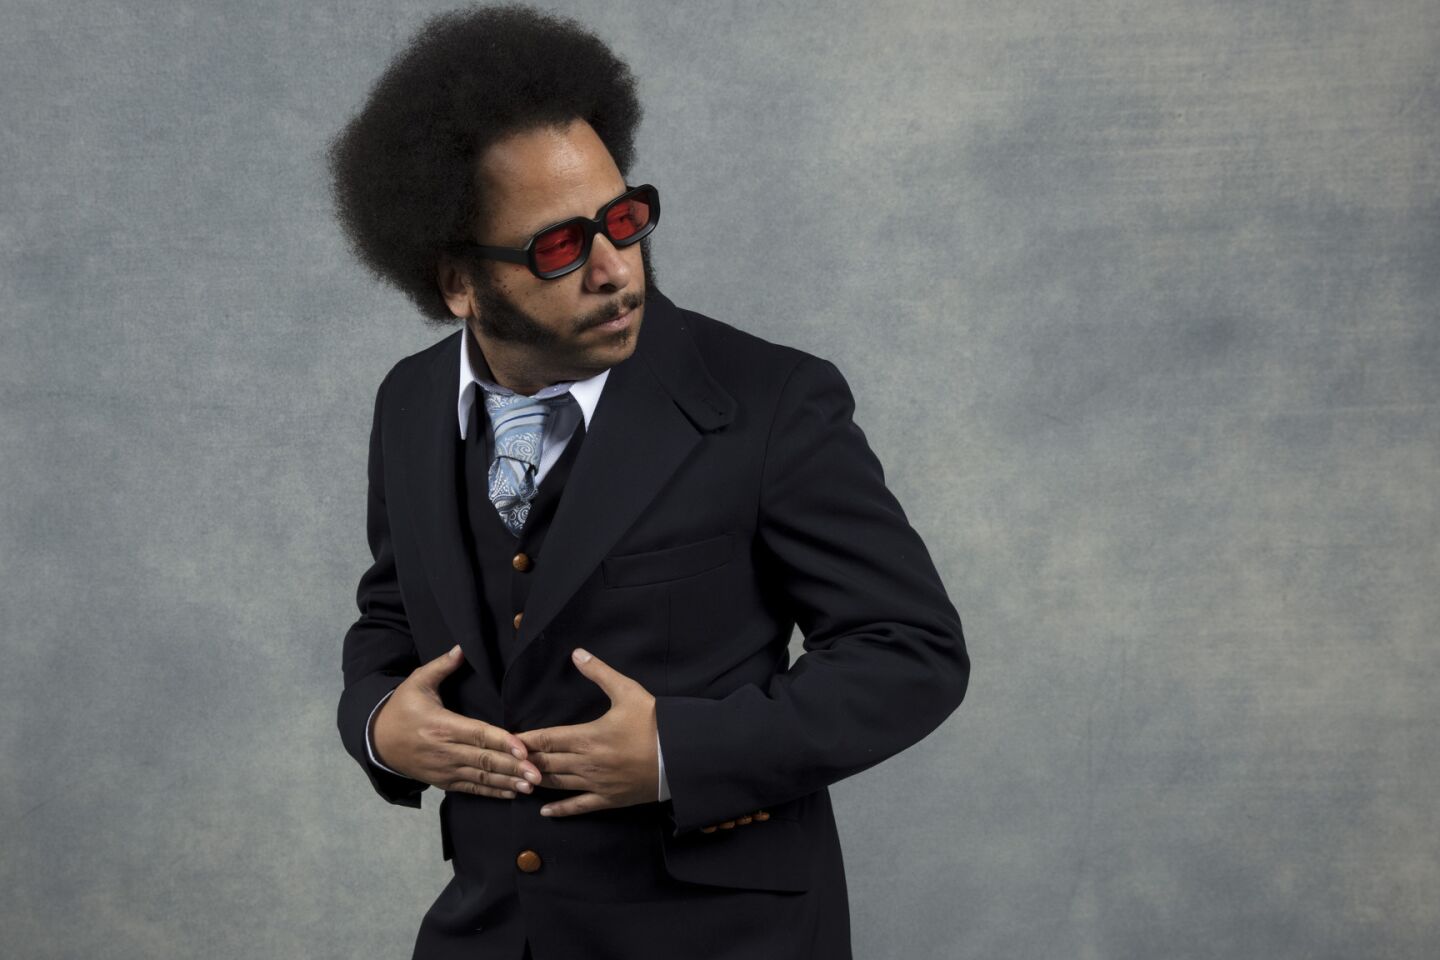 Director Boots Riley from the film, "Sorry to Bother You‚" photographed in the L.A. Times Studio during the Sundance Film Festival in Park City, Utah, Jan. 20, 2018.